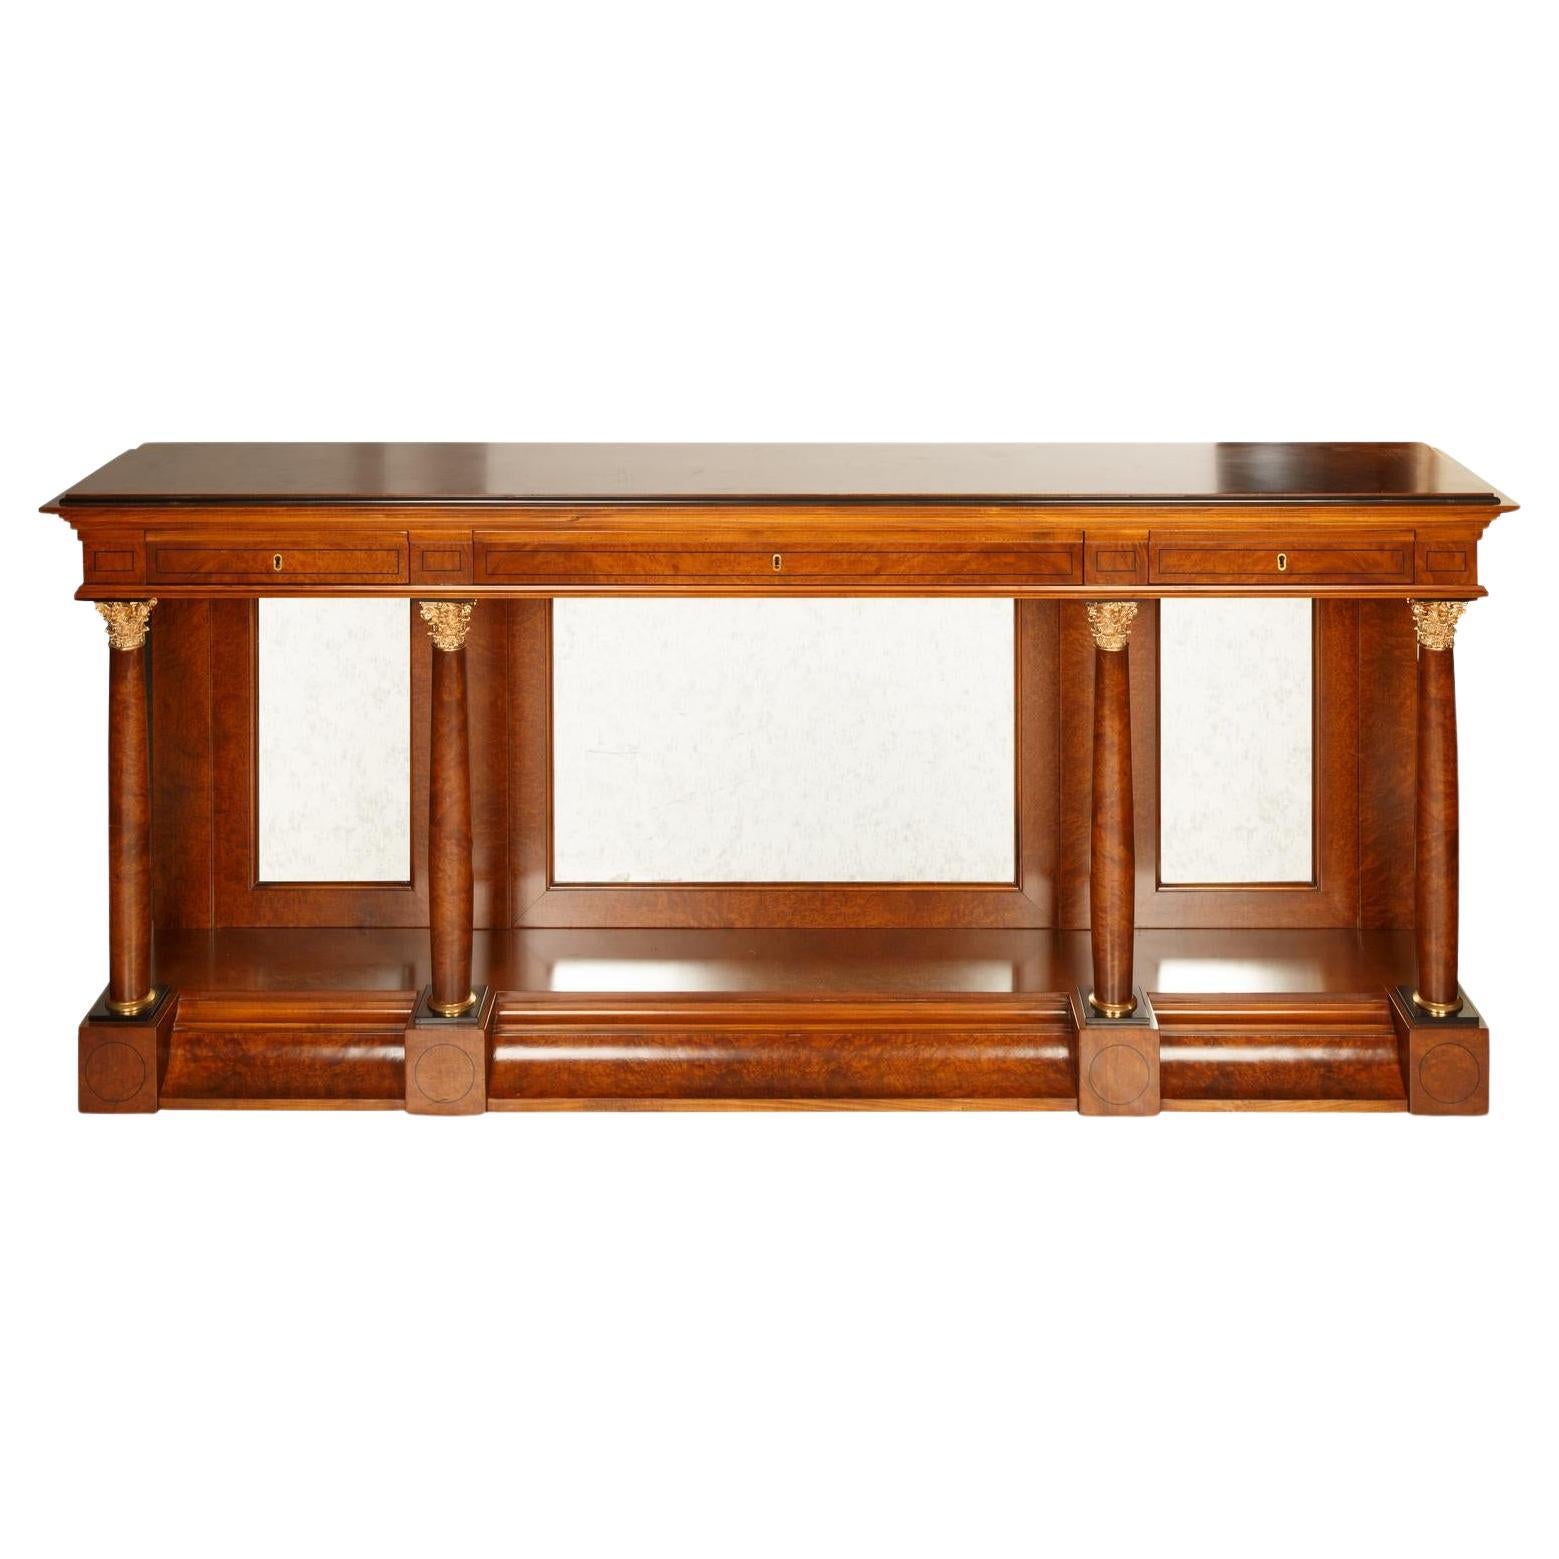 Neo Classical Style Burl Walnut Mirrored Back Console Table / Credenzas